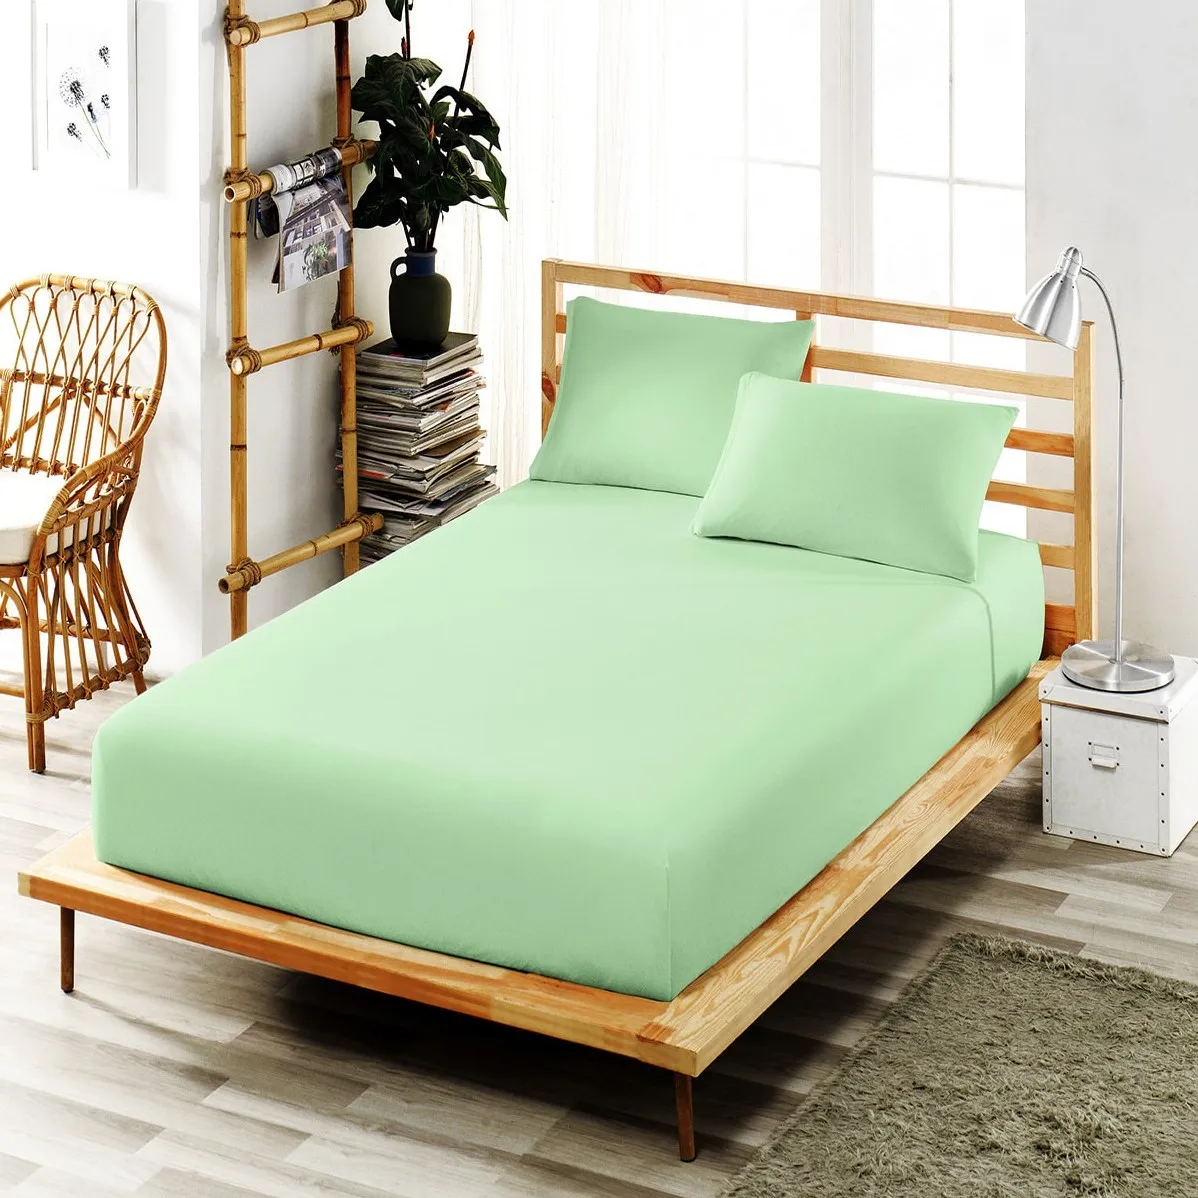 

Fitted Bed Sheet-Linen Cotton Fabric (Ranforce)-All Sizes-King Size-Double-Queen-Twin-Mattress Cover Soft Mint Green